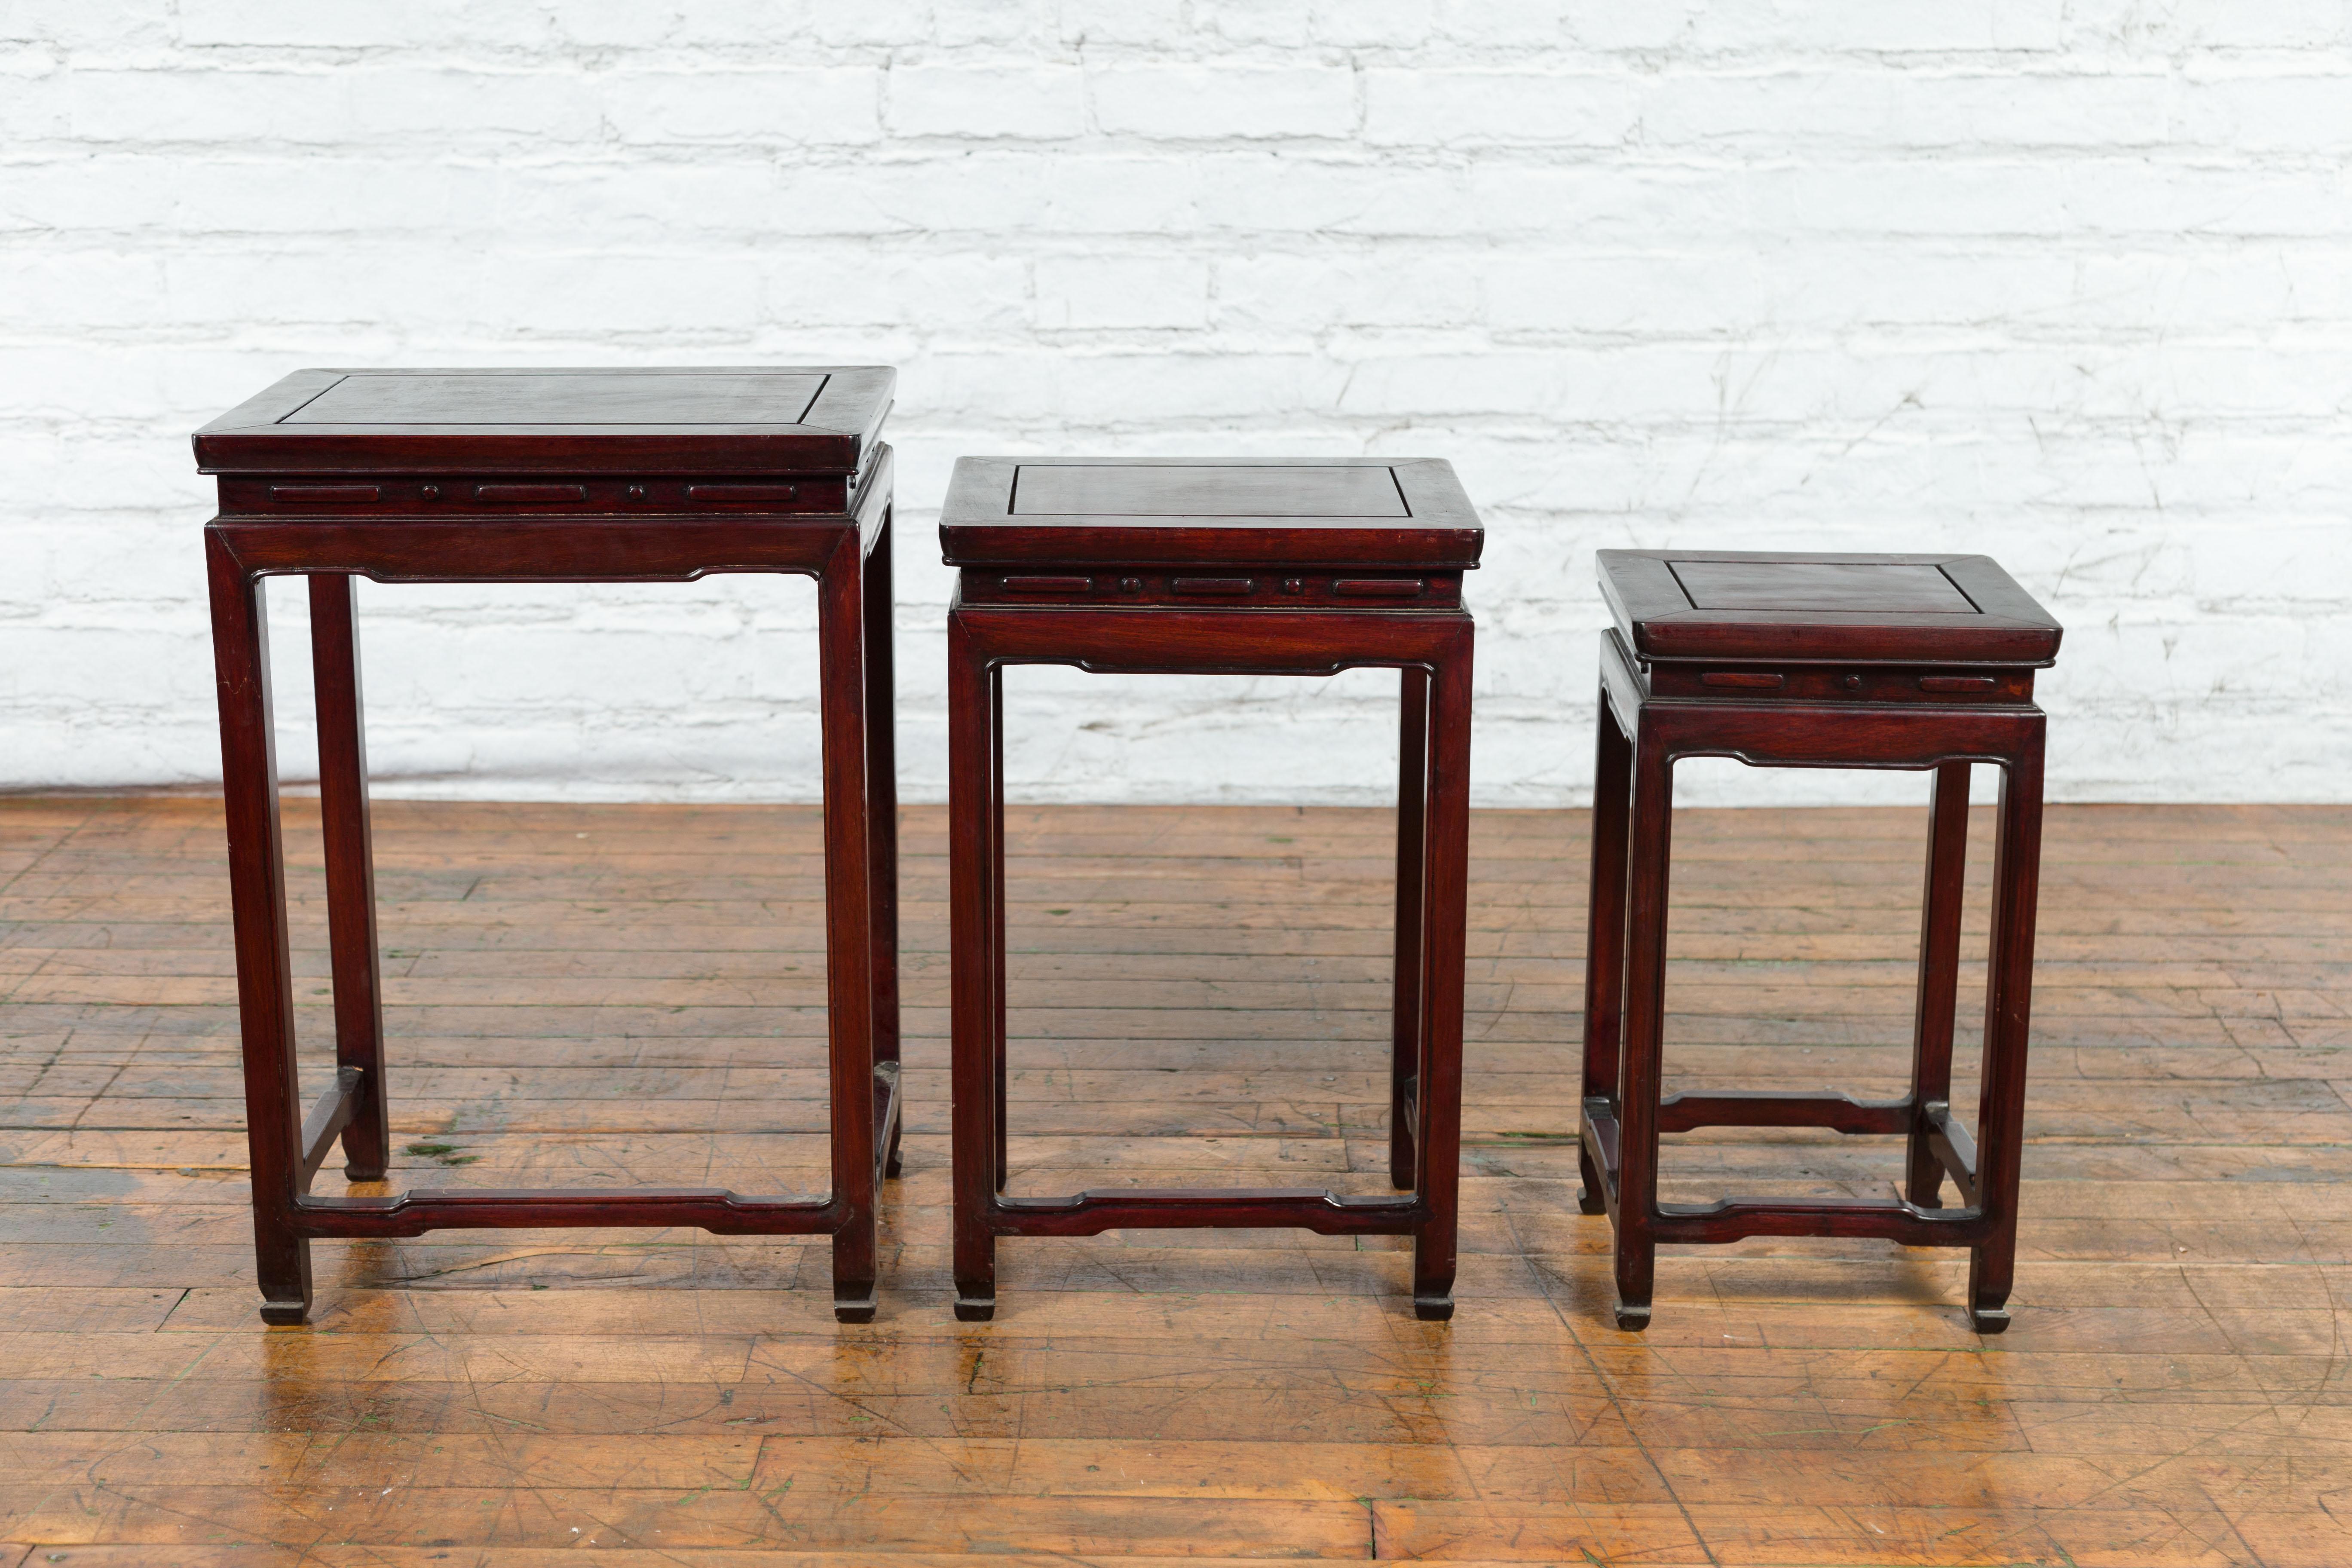 Set of Three Chinese Vintage Rosewood Nesting Tables with Reddish Brown Patina For Sale 2